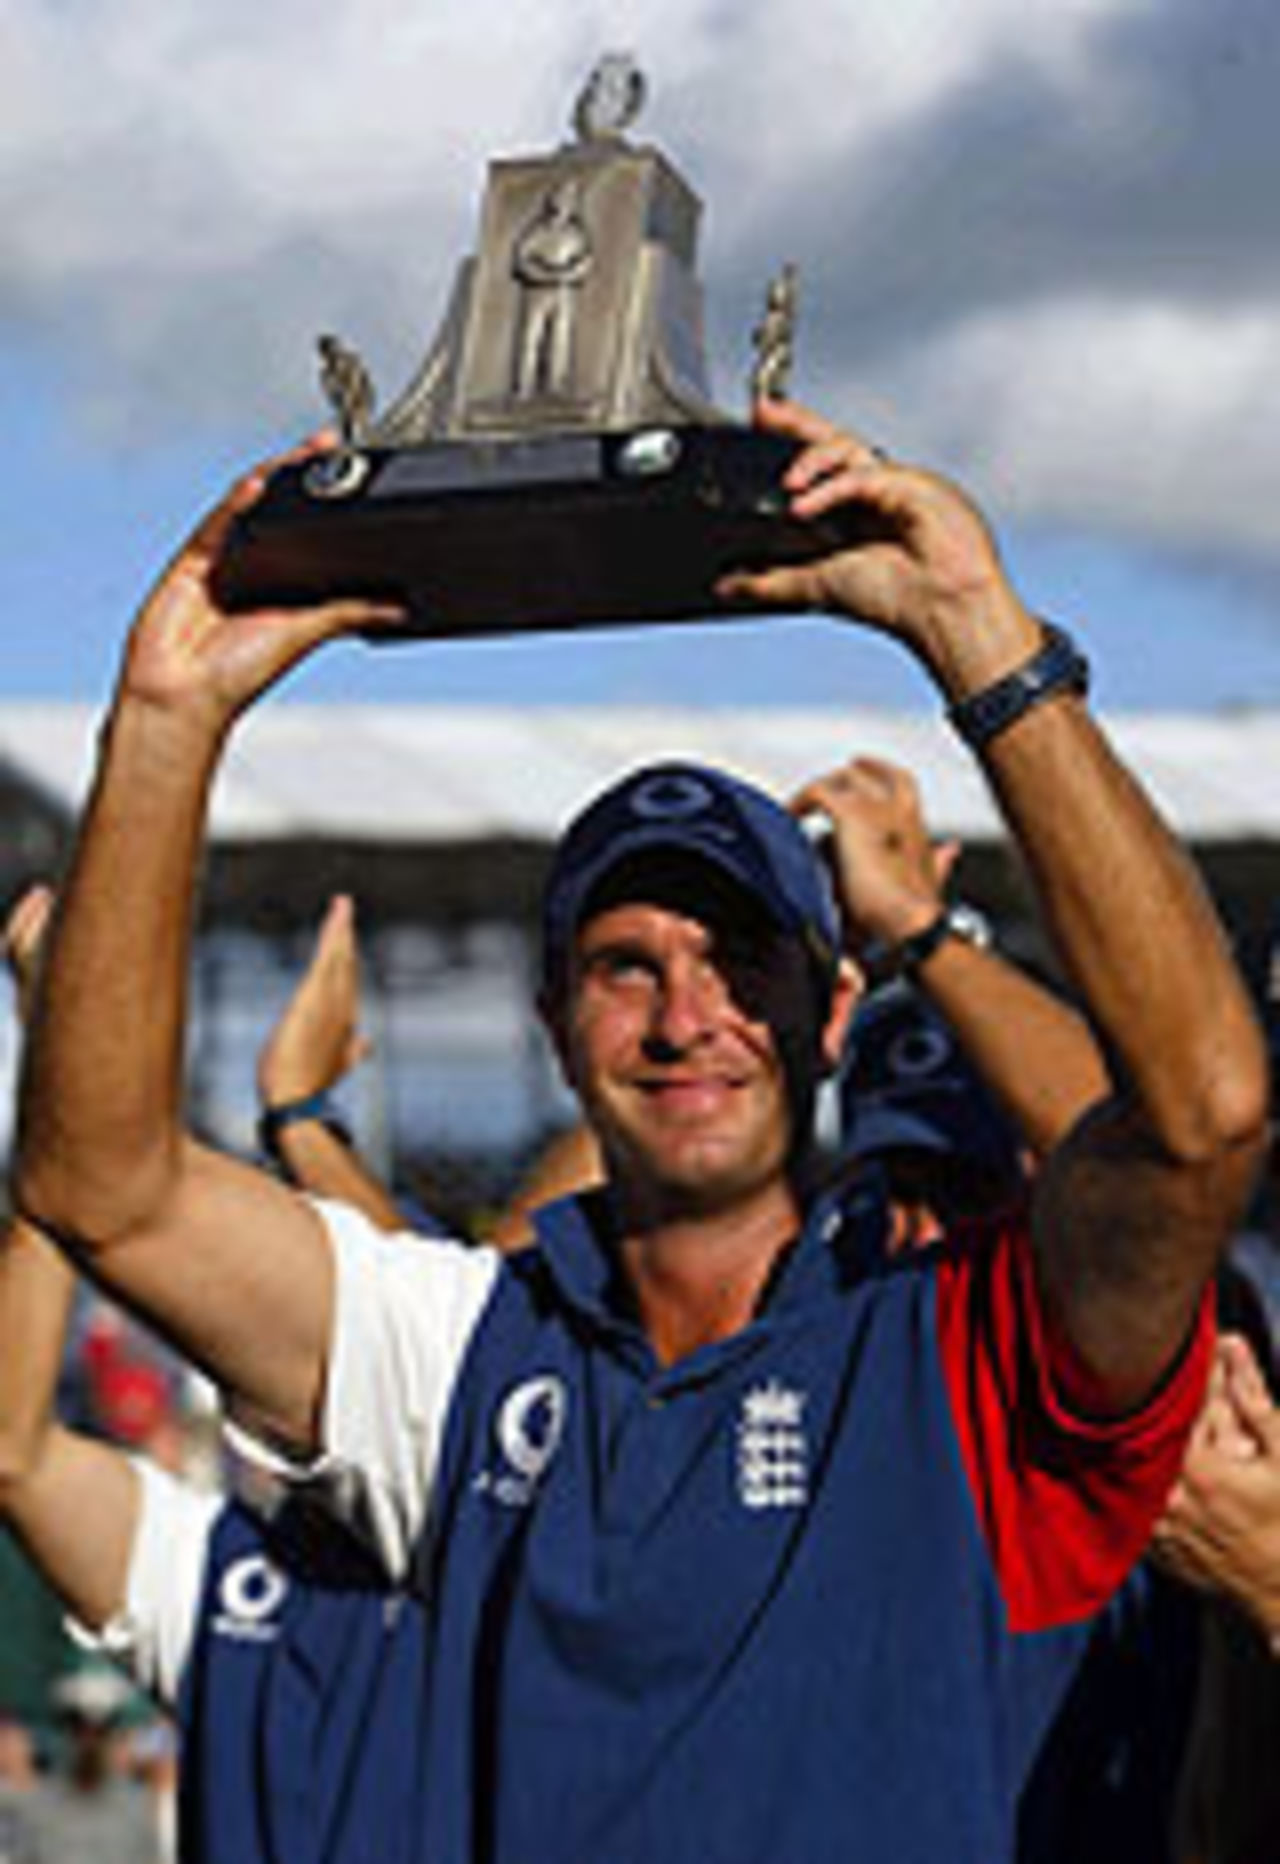 Michael Vaughan with the Wisden Trophy, West Indies v England, 4th Test, Antigua, April 14, 2004